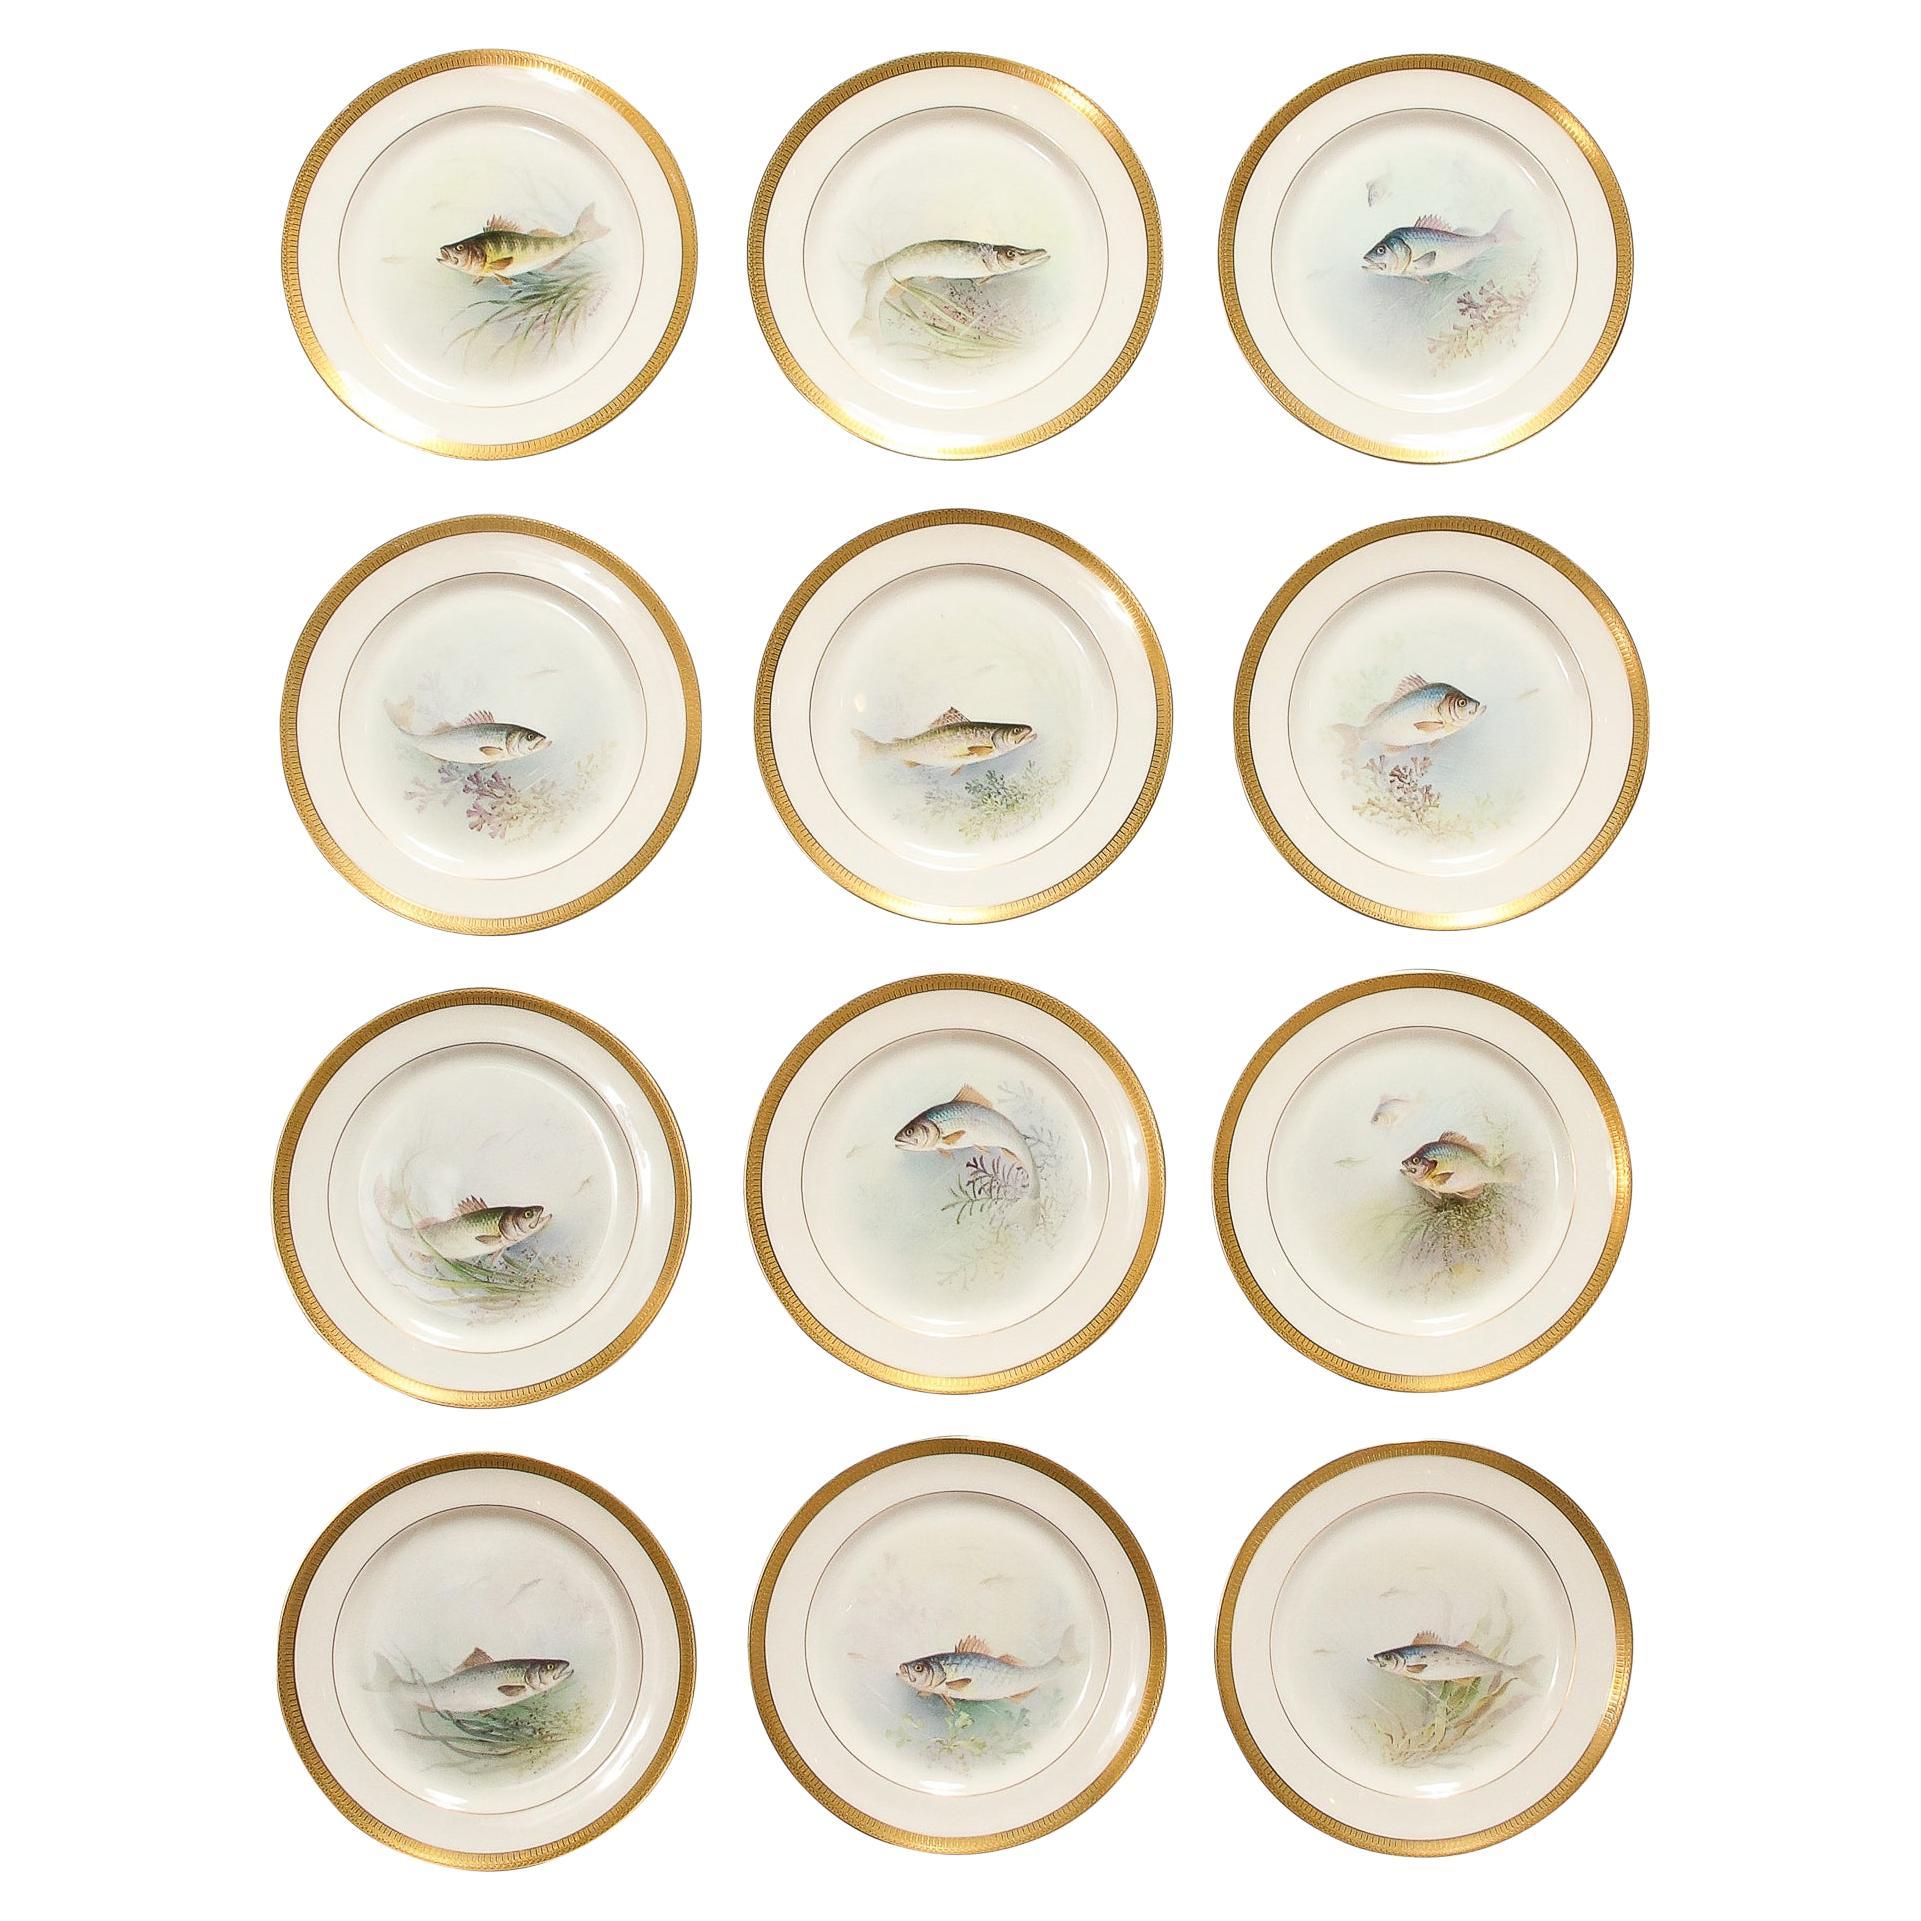 This remarkably beautiful Set of Twelve Hand-Painted Lenox Porcelain Plates signed William Morley Depicting Fish originates from the United States, Circa 1900. Features a gilt border with precise natural and geometric repeating motifs circumscribing